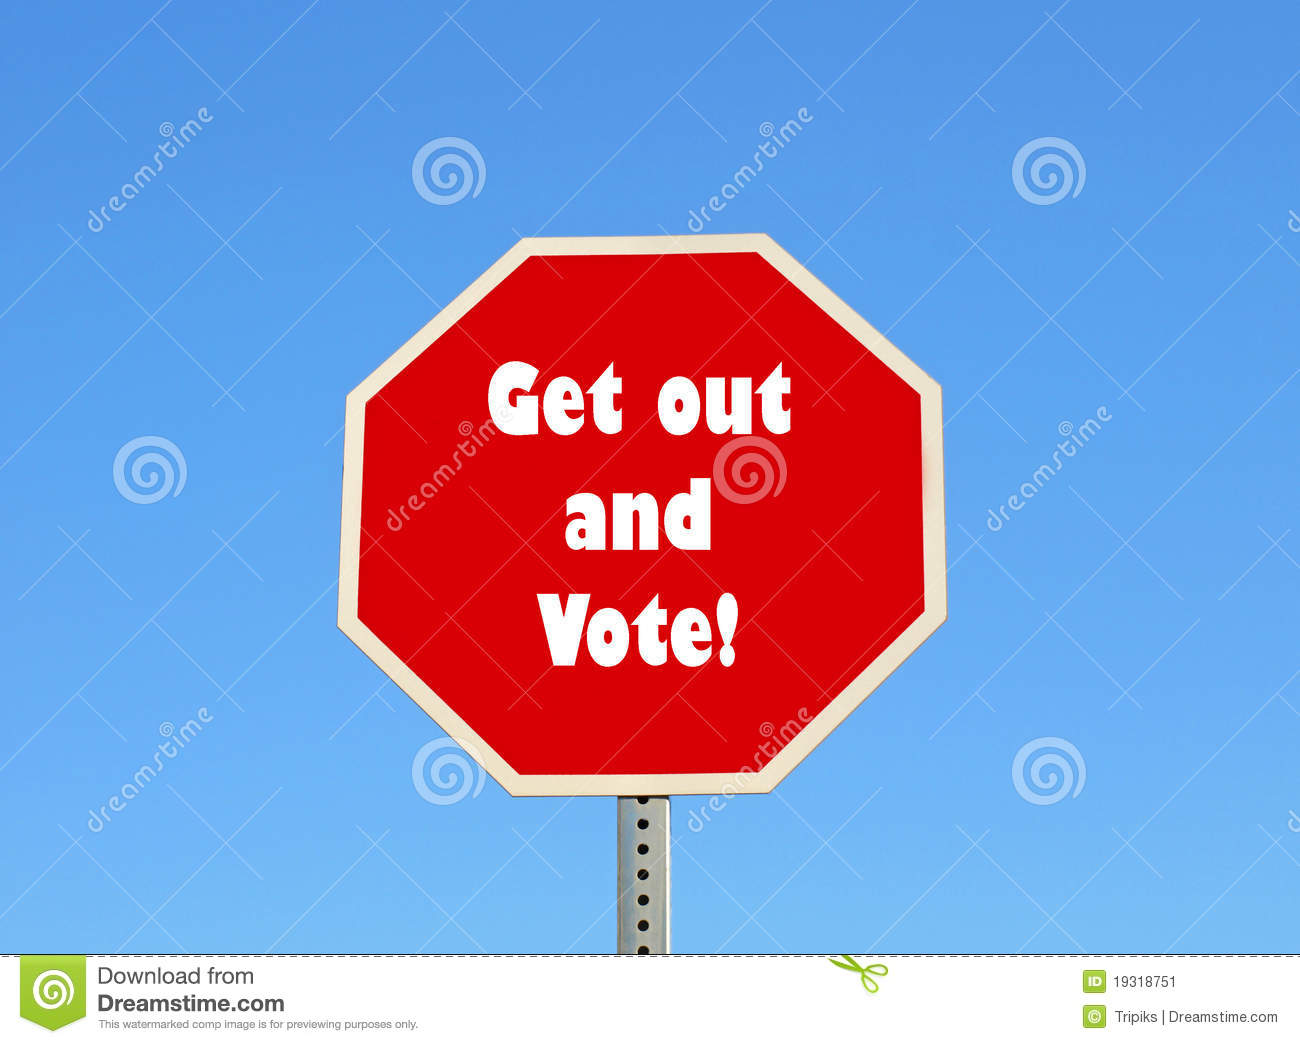 More Similar Stock Images Of   Get Out And Vote